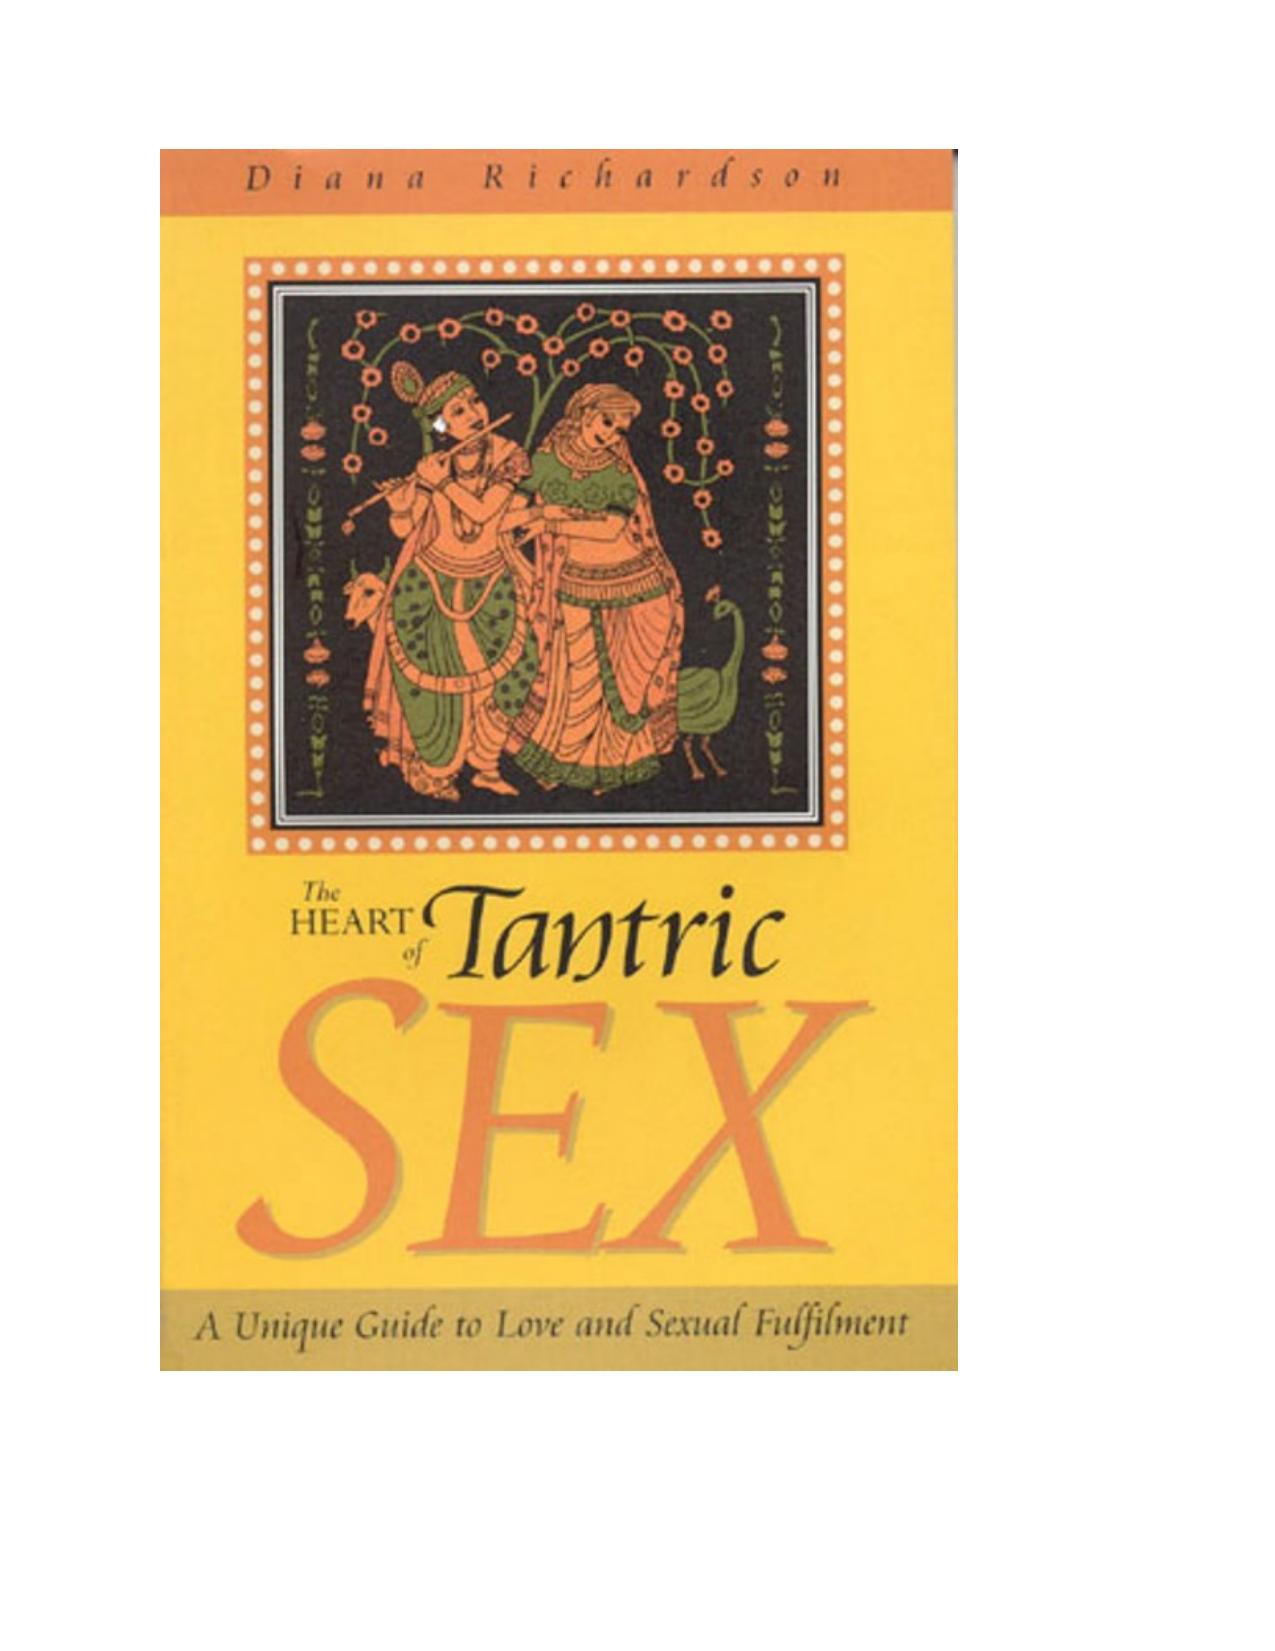 Heart of Tantric Sex by Diana Richardson